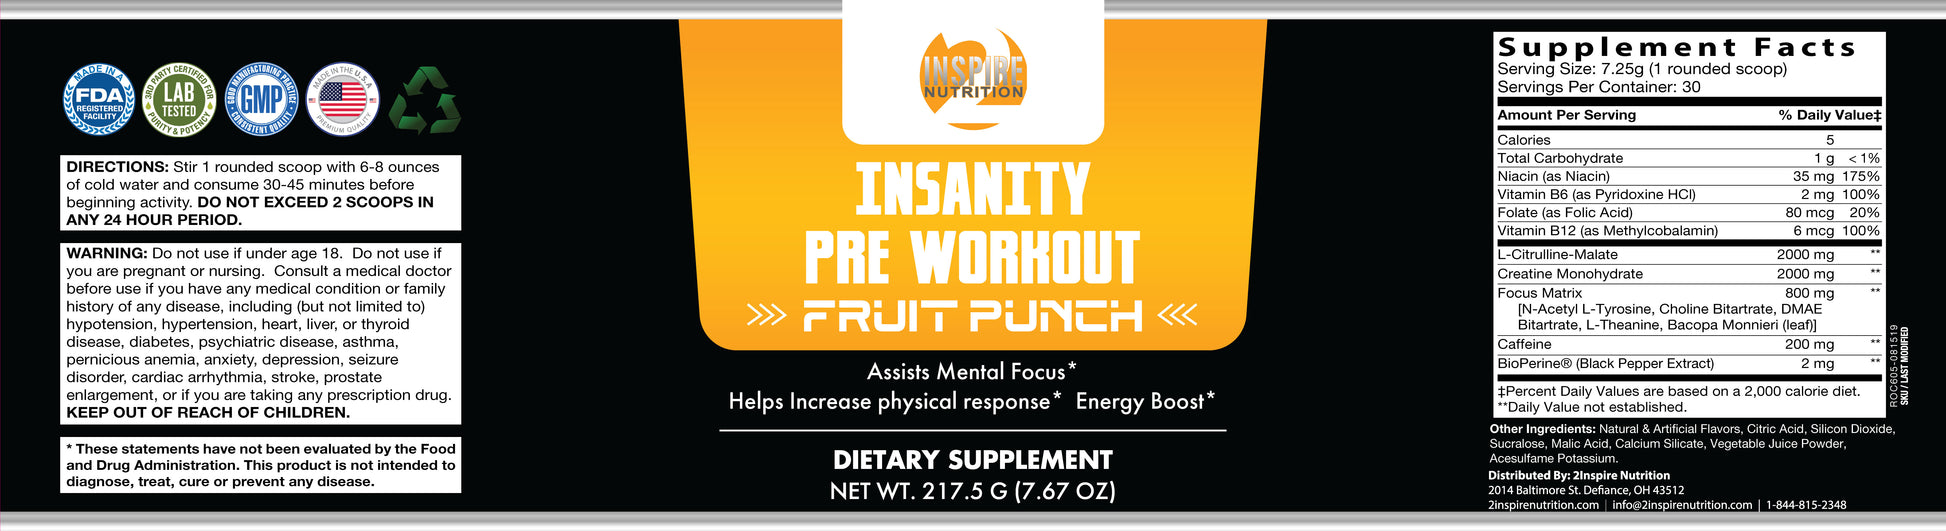 Insanity Pre-Workout-Fruit Punch Wrapper